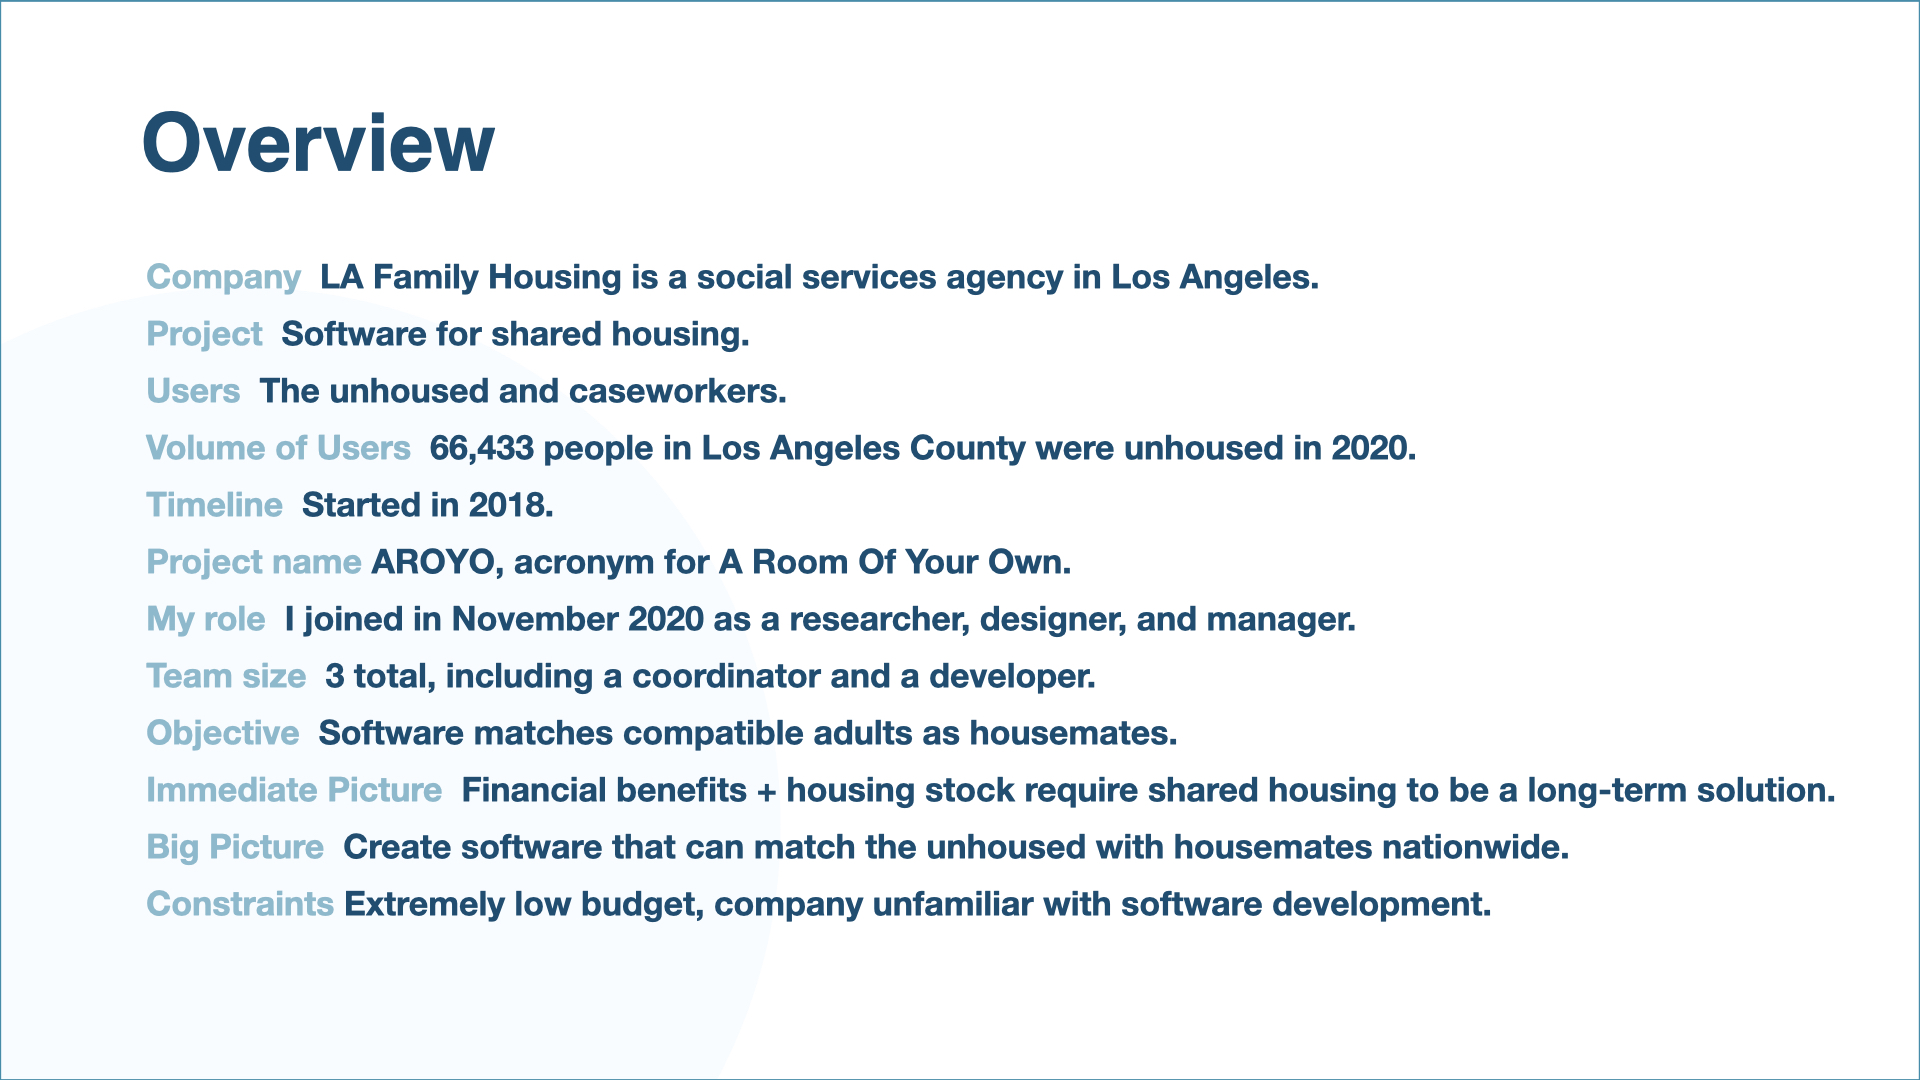 AROYO Shared Housing App - Project Manager and UX Researcher